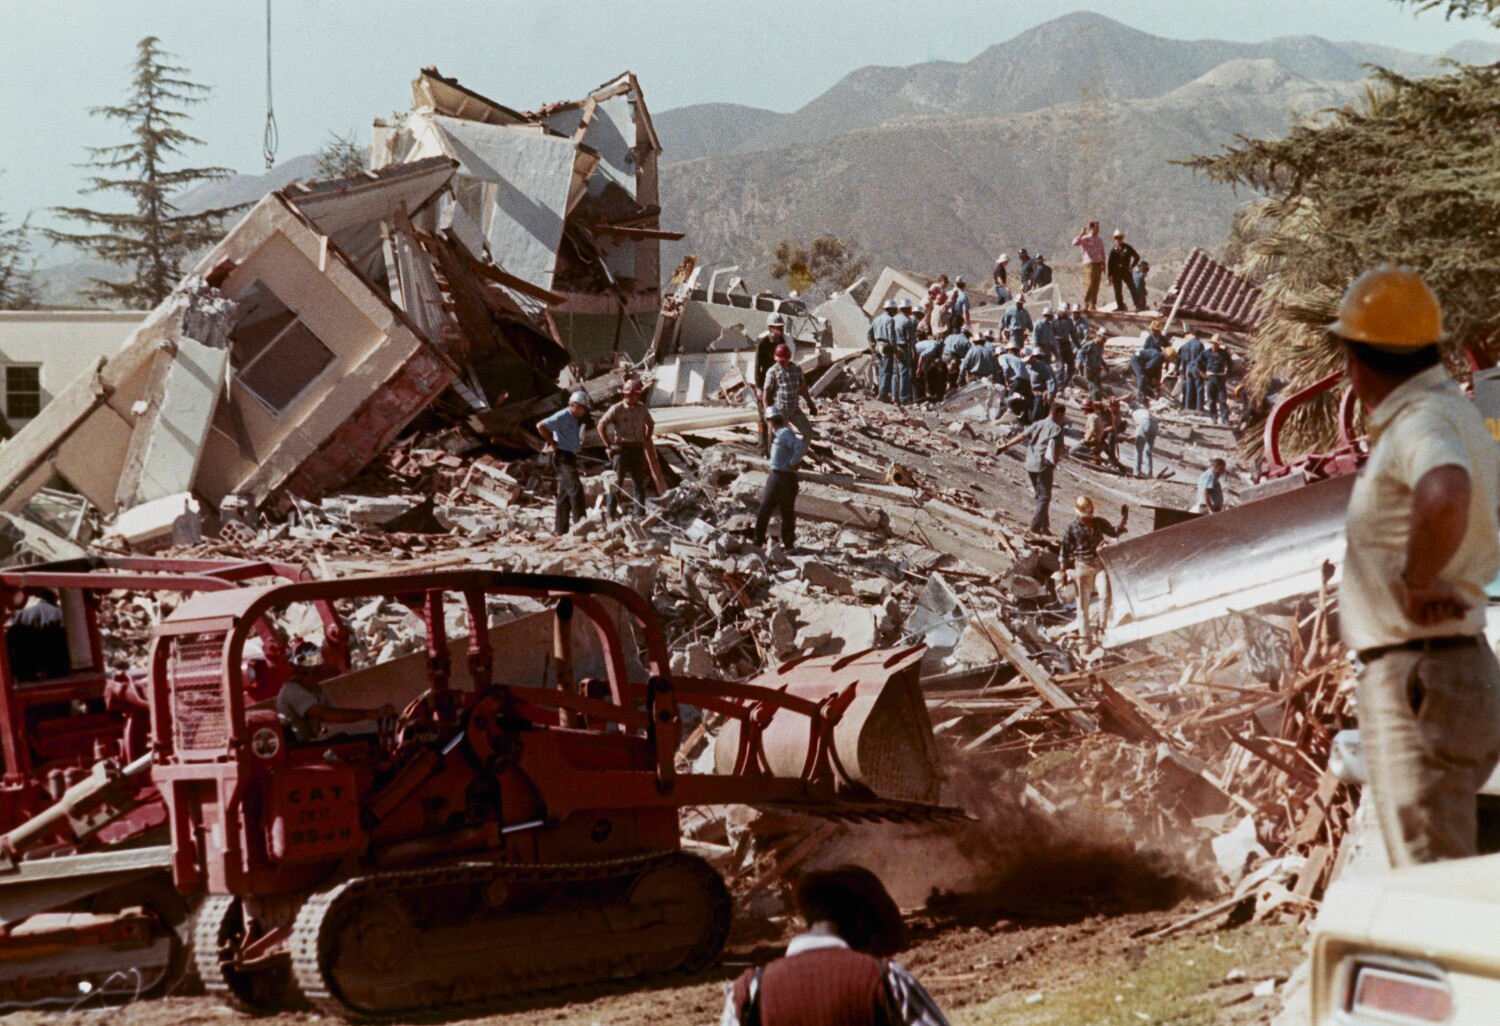 50 years ago, the Sylmar earthquake shook L.A., and nothing's been the same since